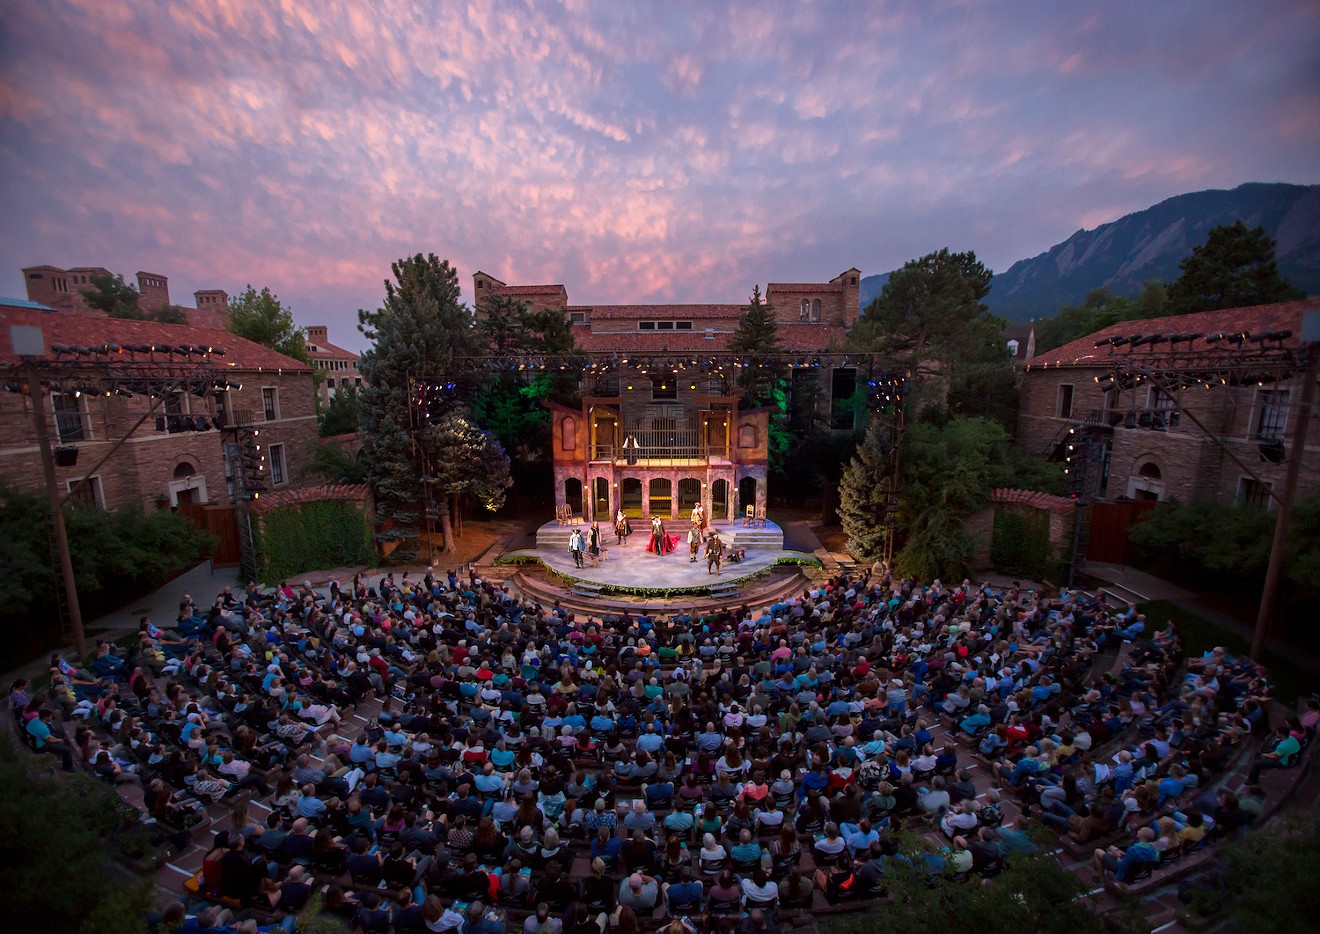 The Colorado Shakespeare Festival's future looks bright under the direction of Timothy Orr.